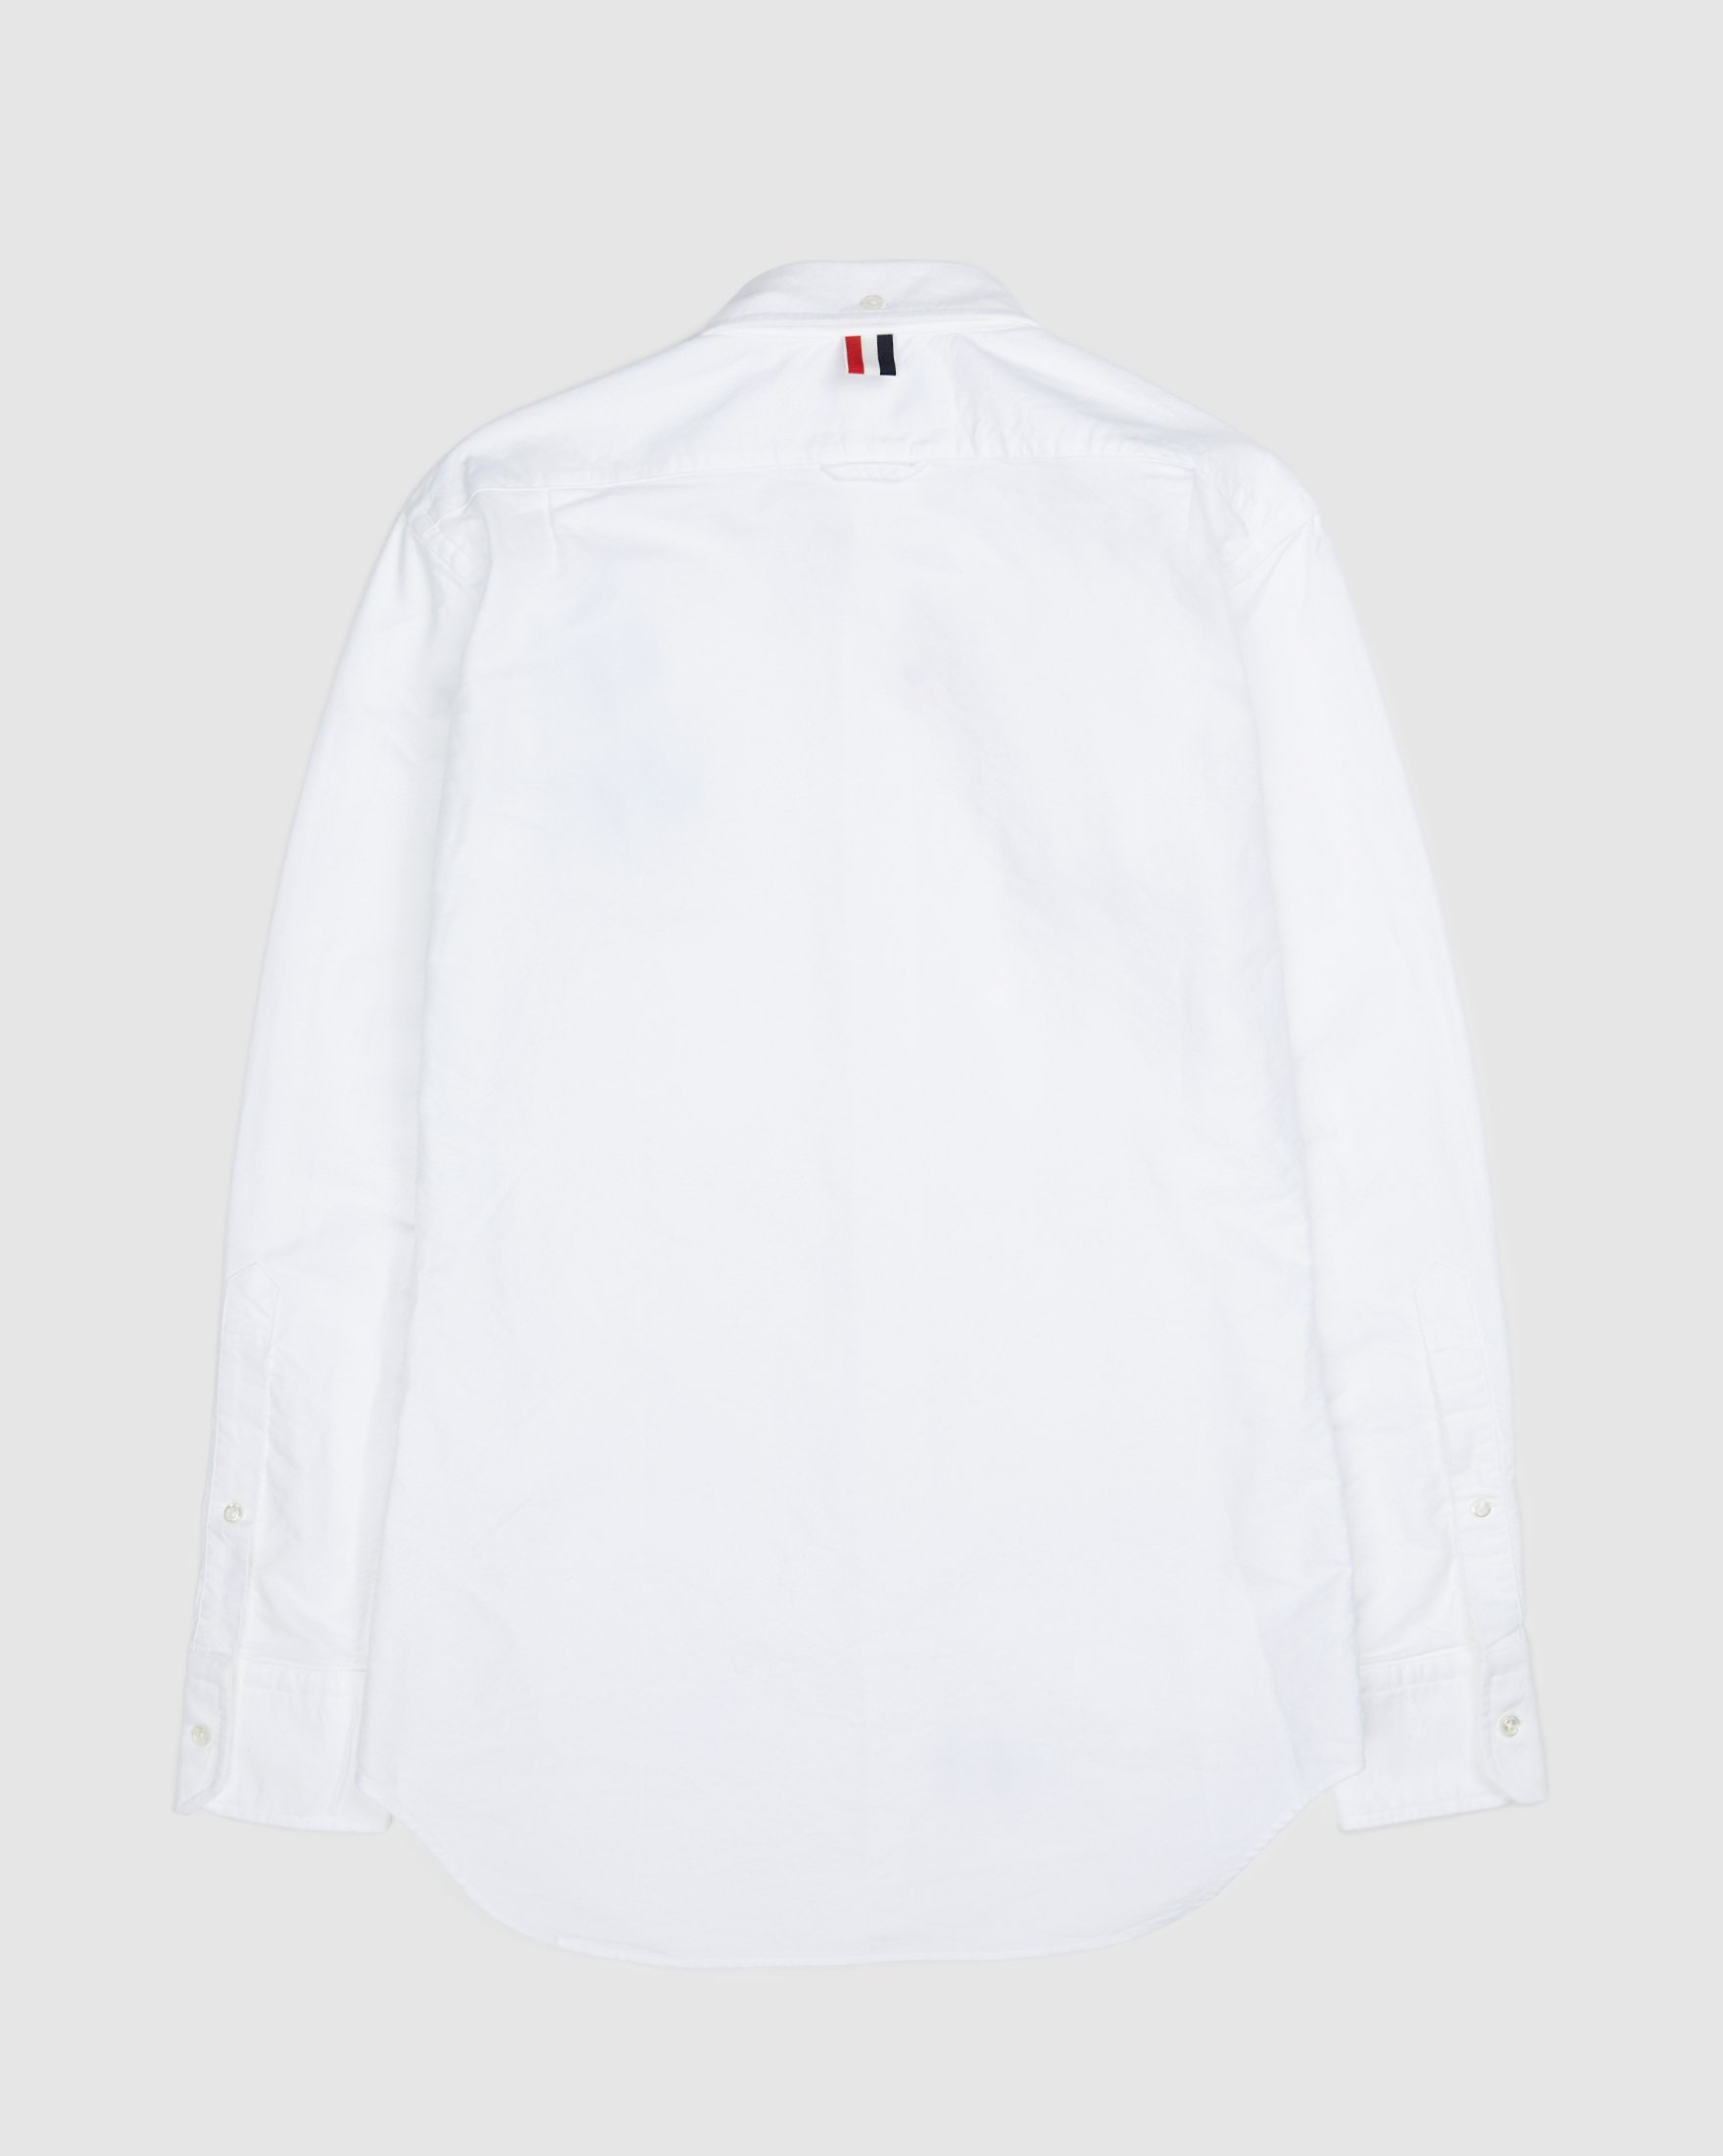 Colette Mon Amour x Thom Browne - White Heart Classic Shirt - Clothing - White - Image 2